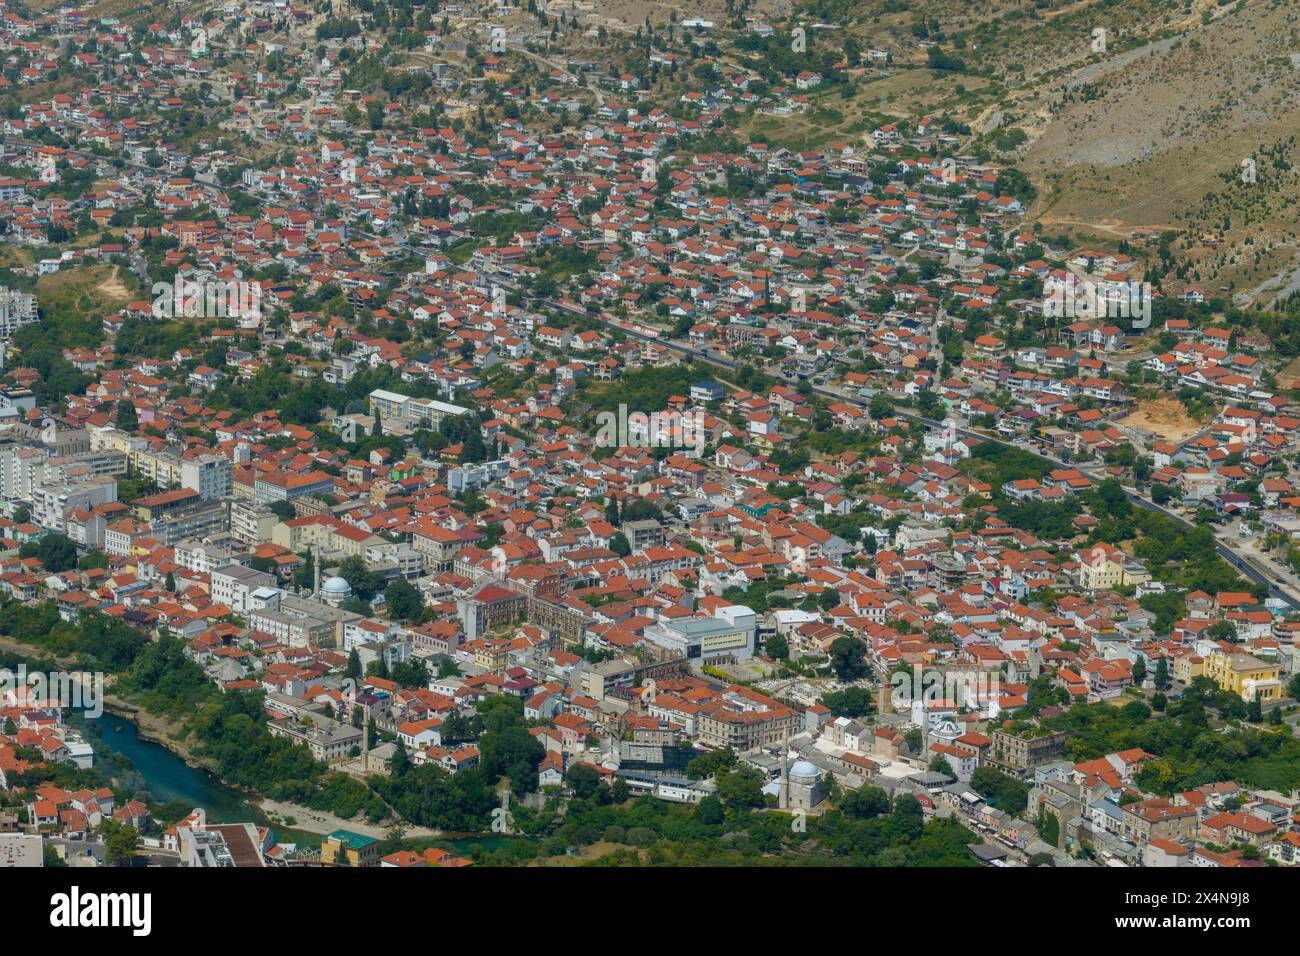 Aerial view of the skyline of Mostar, Bosnia and Herzegovina. Stock Photo